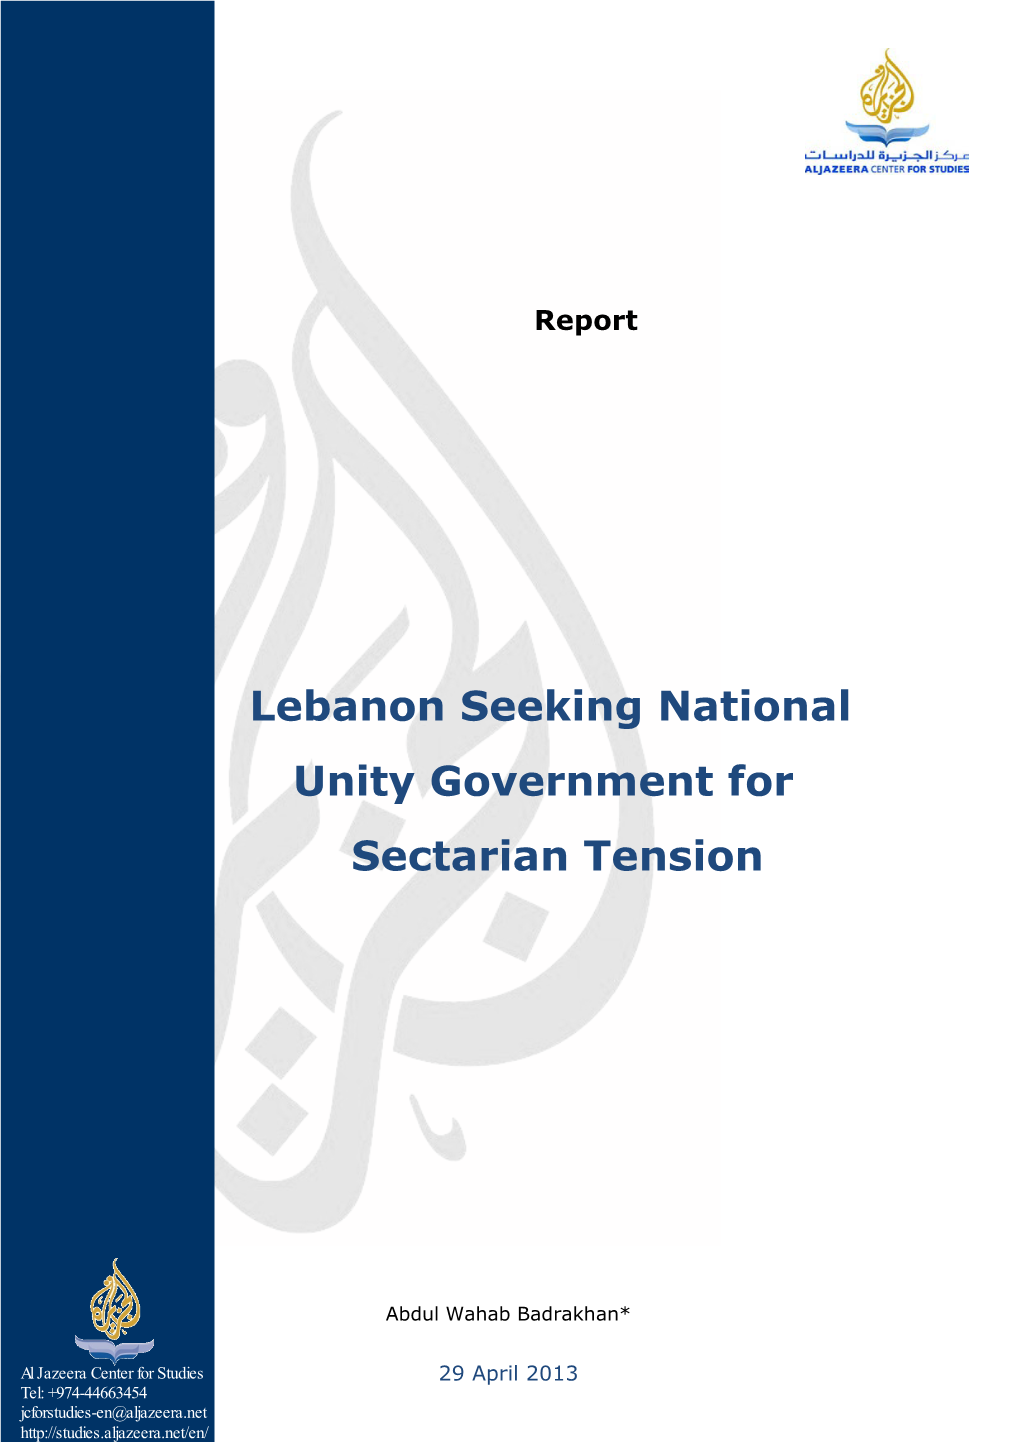 Lebanon Seeking National Unity Government for Sectarian Tension